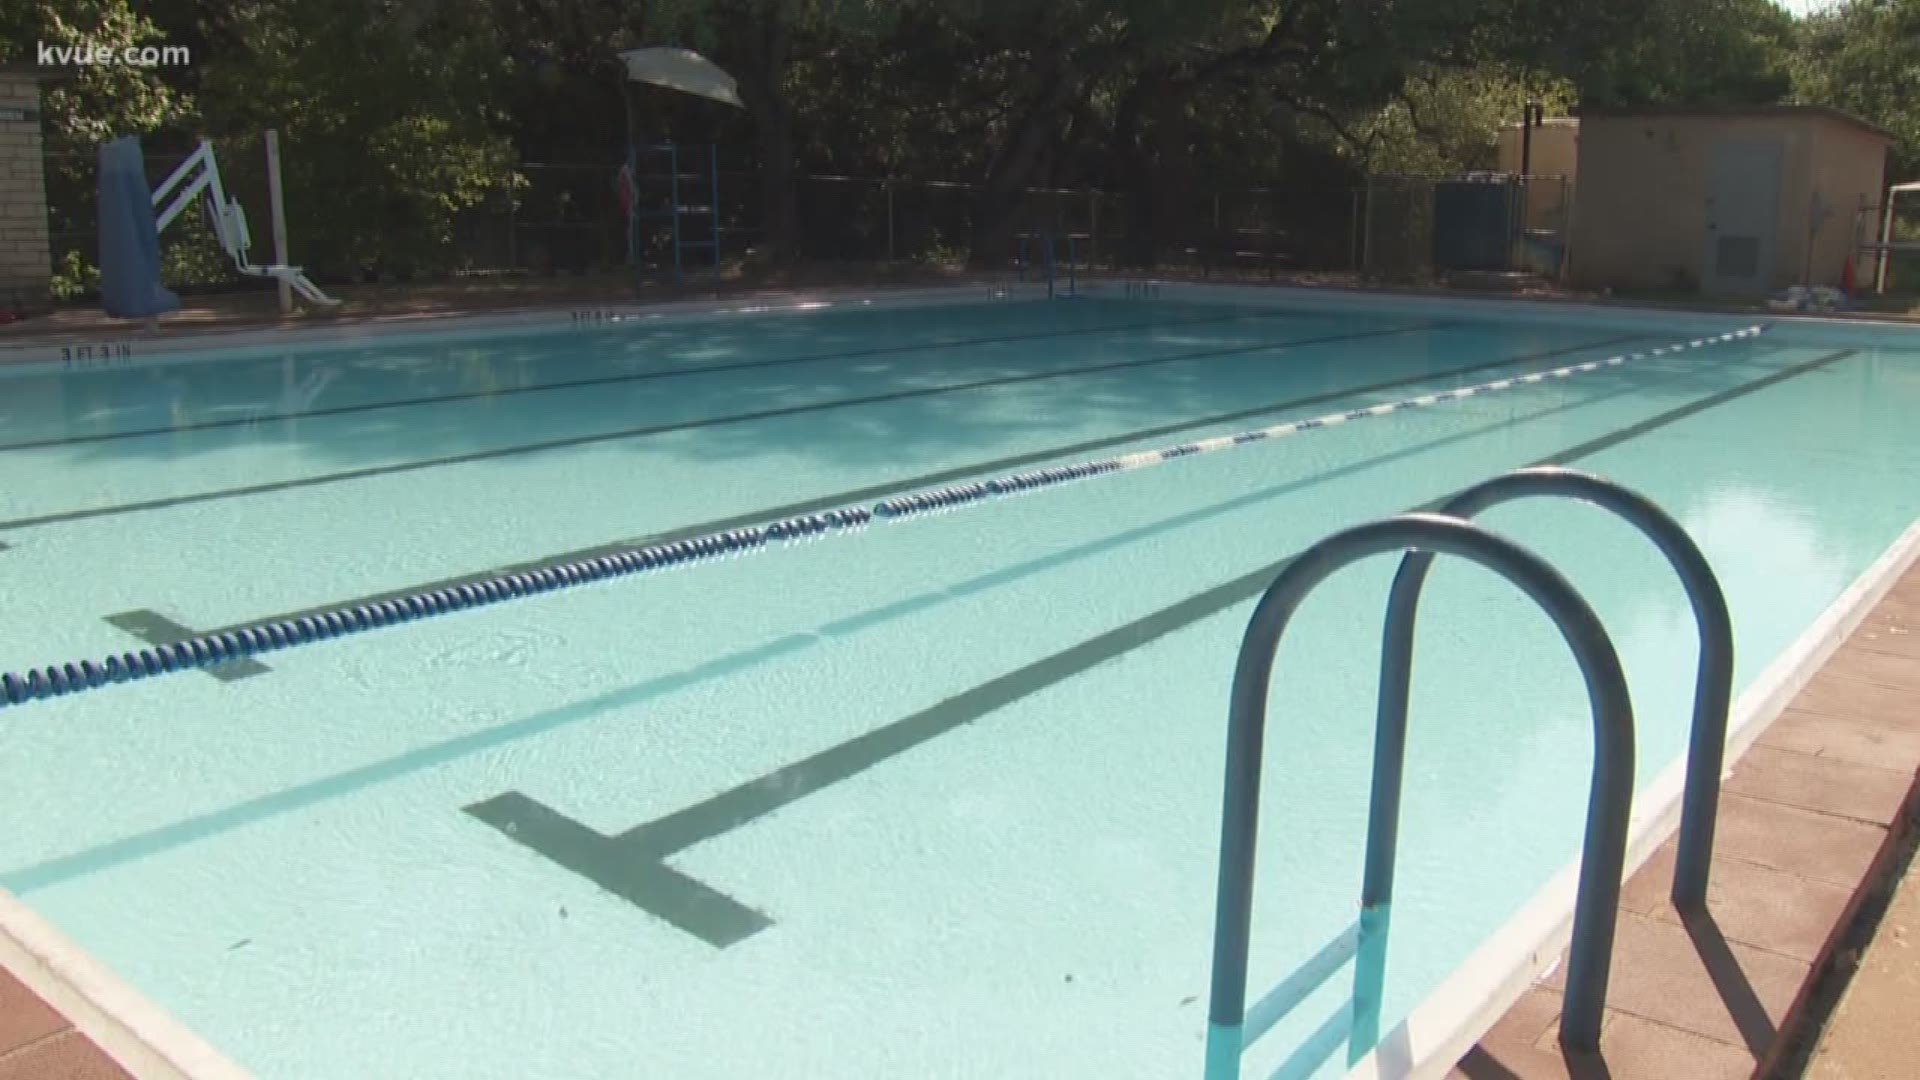 This week, the Austin City Council will vote on a multi-million-dollar plan to repair several city swimming pools. Ten of those pools could be closed for good.